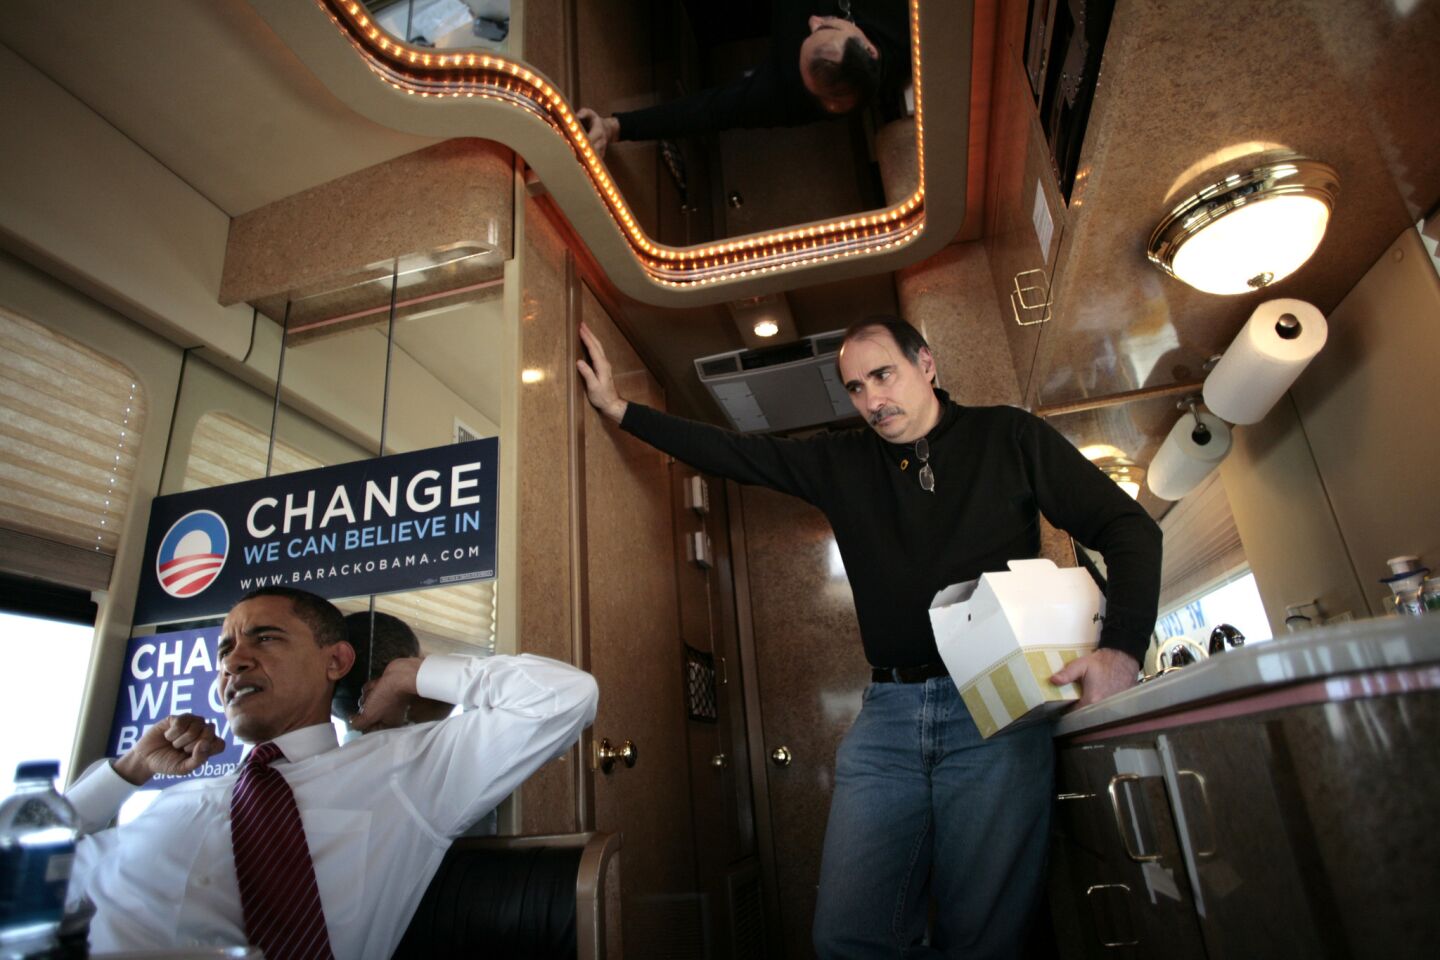 One of President Obama's longest-serving advisors, David Axelrod worked at the Chicago Tribune until entering politics. The two had known each other since 1992, and Axelrod eventually served as Obama's chief campaign advisor in 2008. After the election, he served as Obama's senior advisor until 2011, when he left to work on the 2012 campaign. Axelrod announced the reelection campaign would be his last, and has since focused on his work to find a cure for epilepsy, along with a gig as a political analyst for NBC and MSNBC.